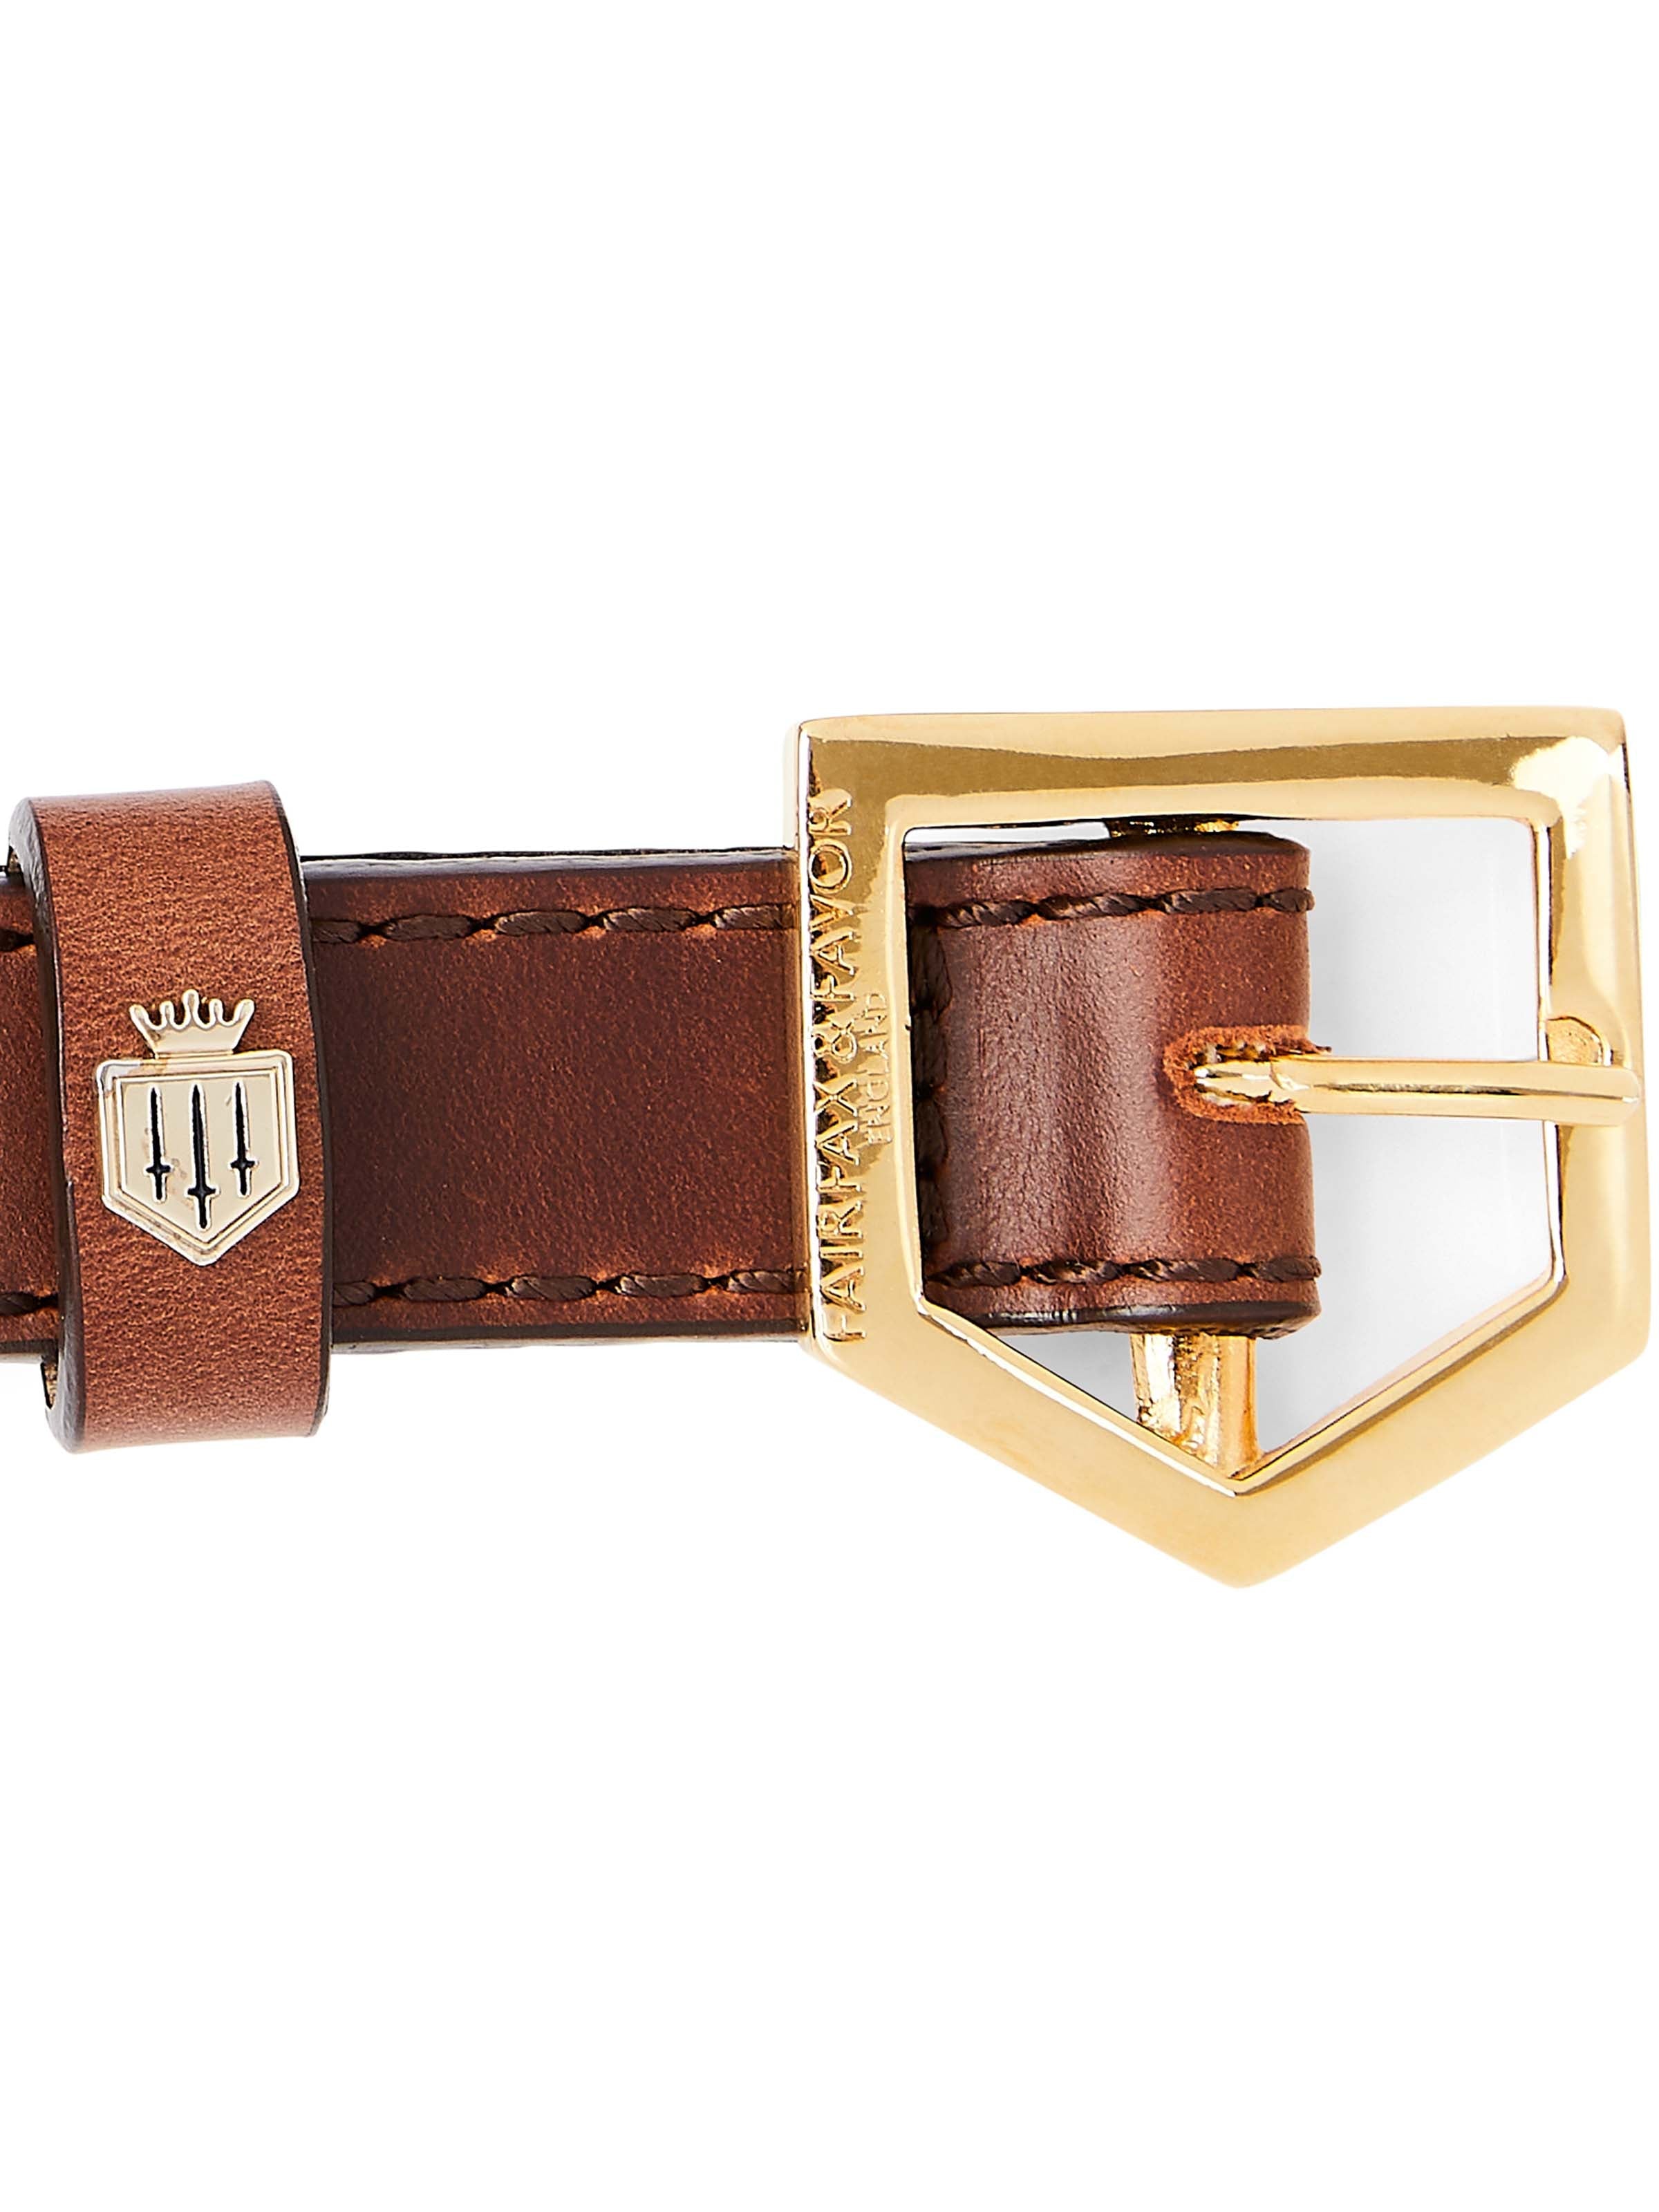 The Fitzroy Dog Collar - Tan Leather